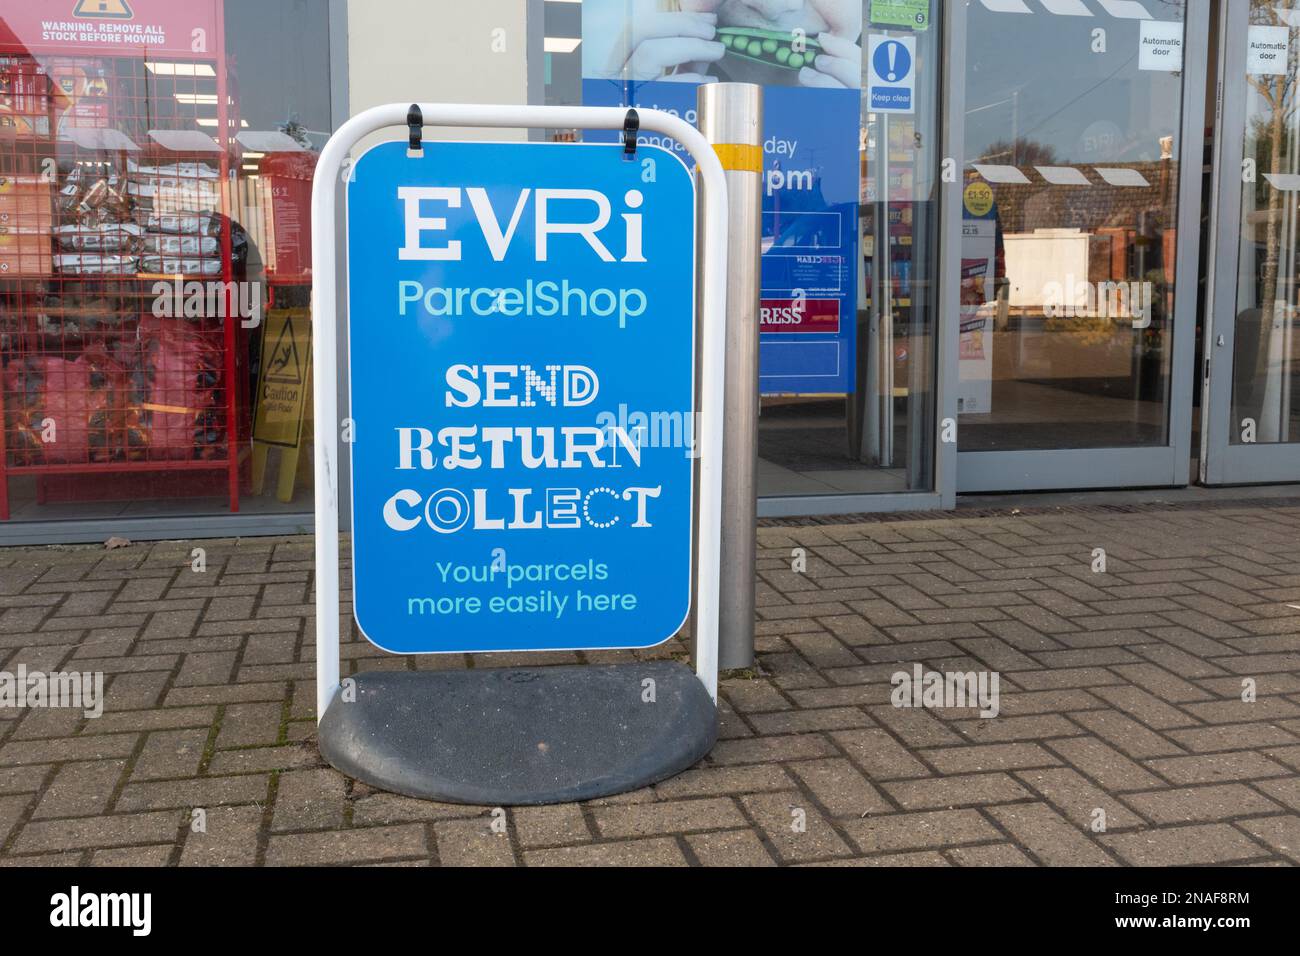 Evri Parcel Shop sign outside a convenience store for picking up and sending parcels, England, UK Stock Photo